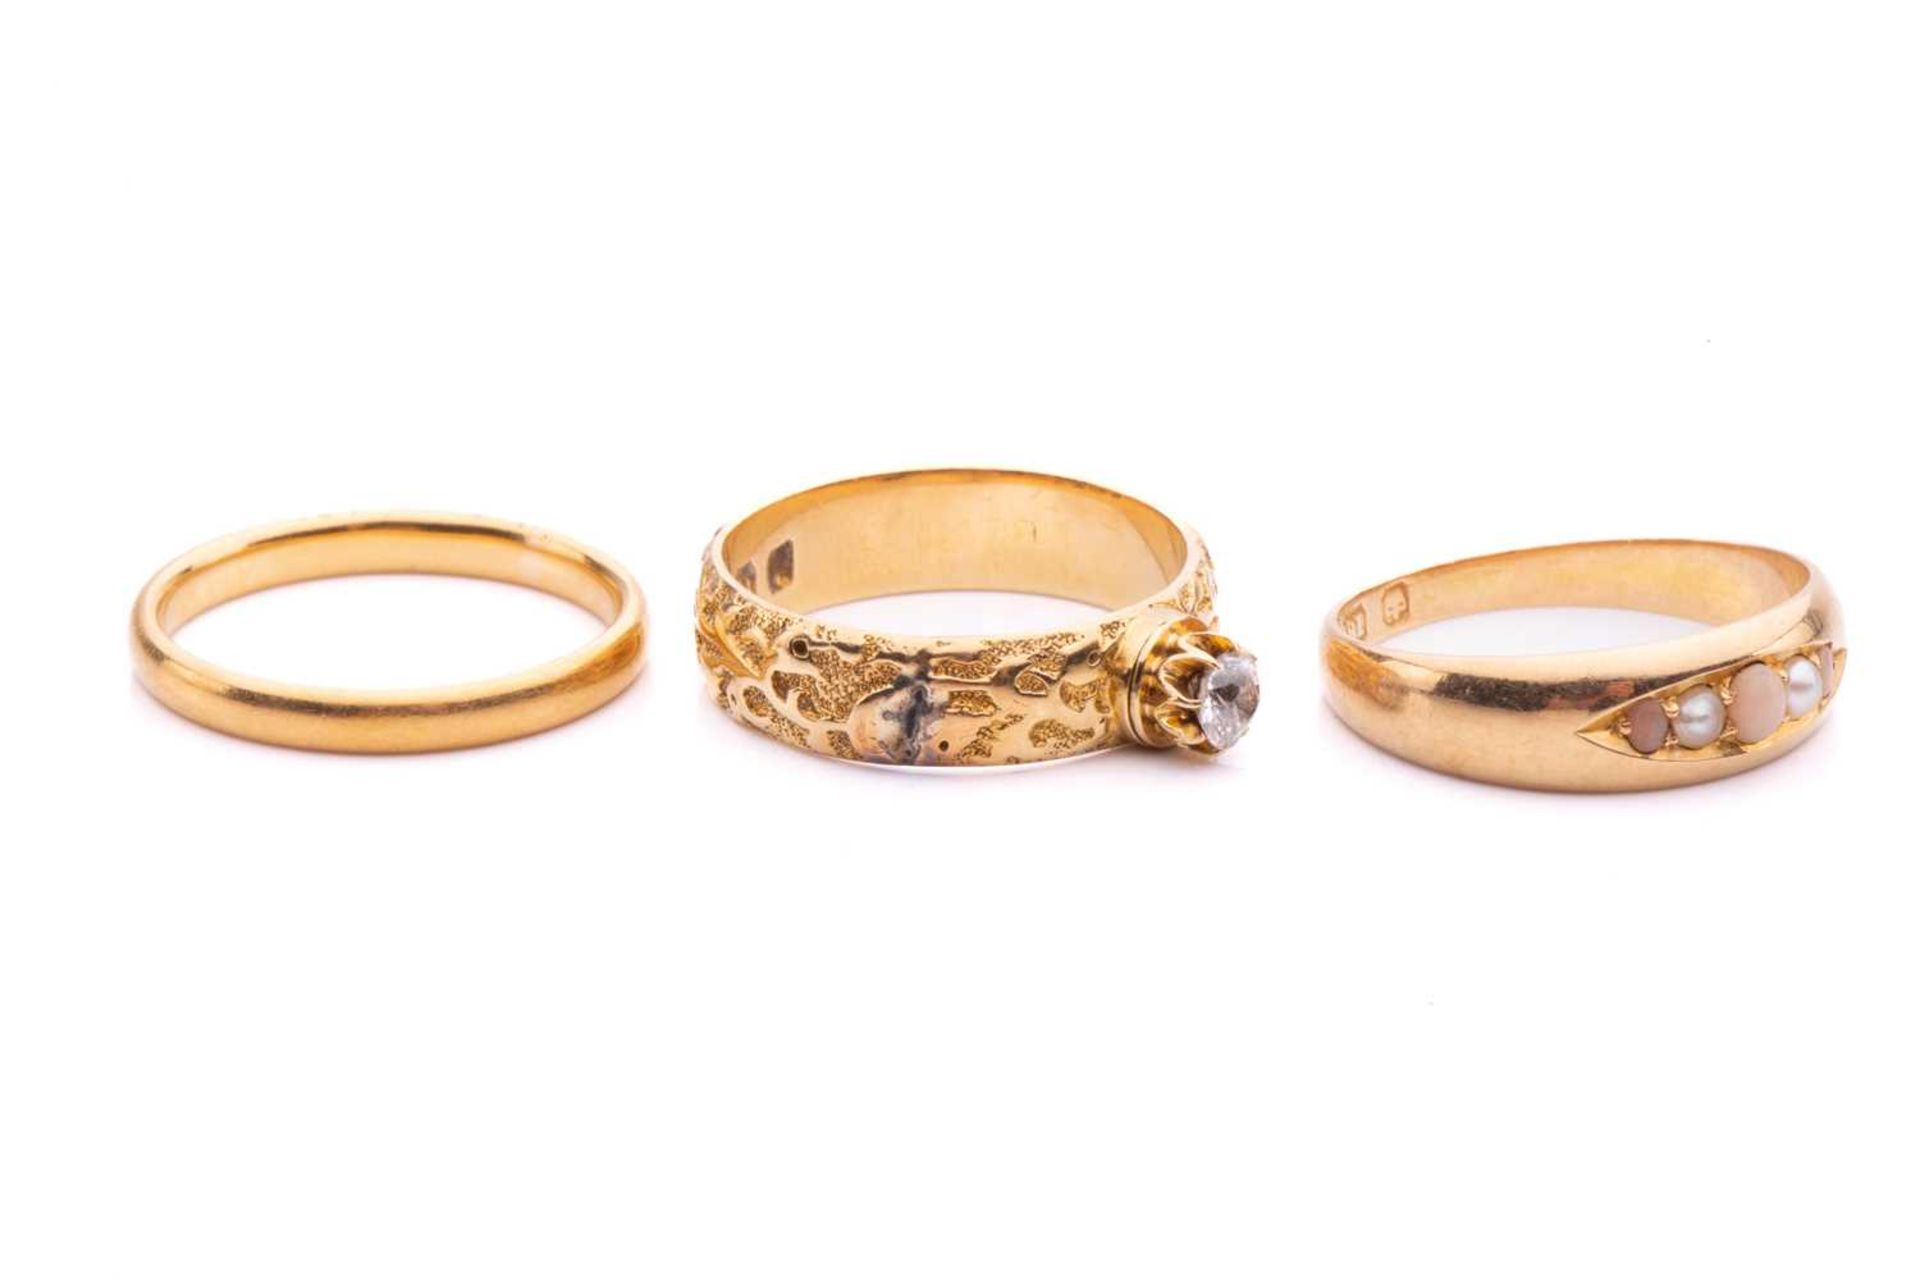 Two Victorian gem-set rings and a 22ct gold wedding band; including an old-cut diamond solitaire - Image 3 of 5